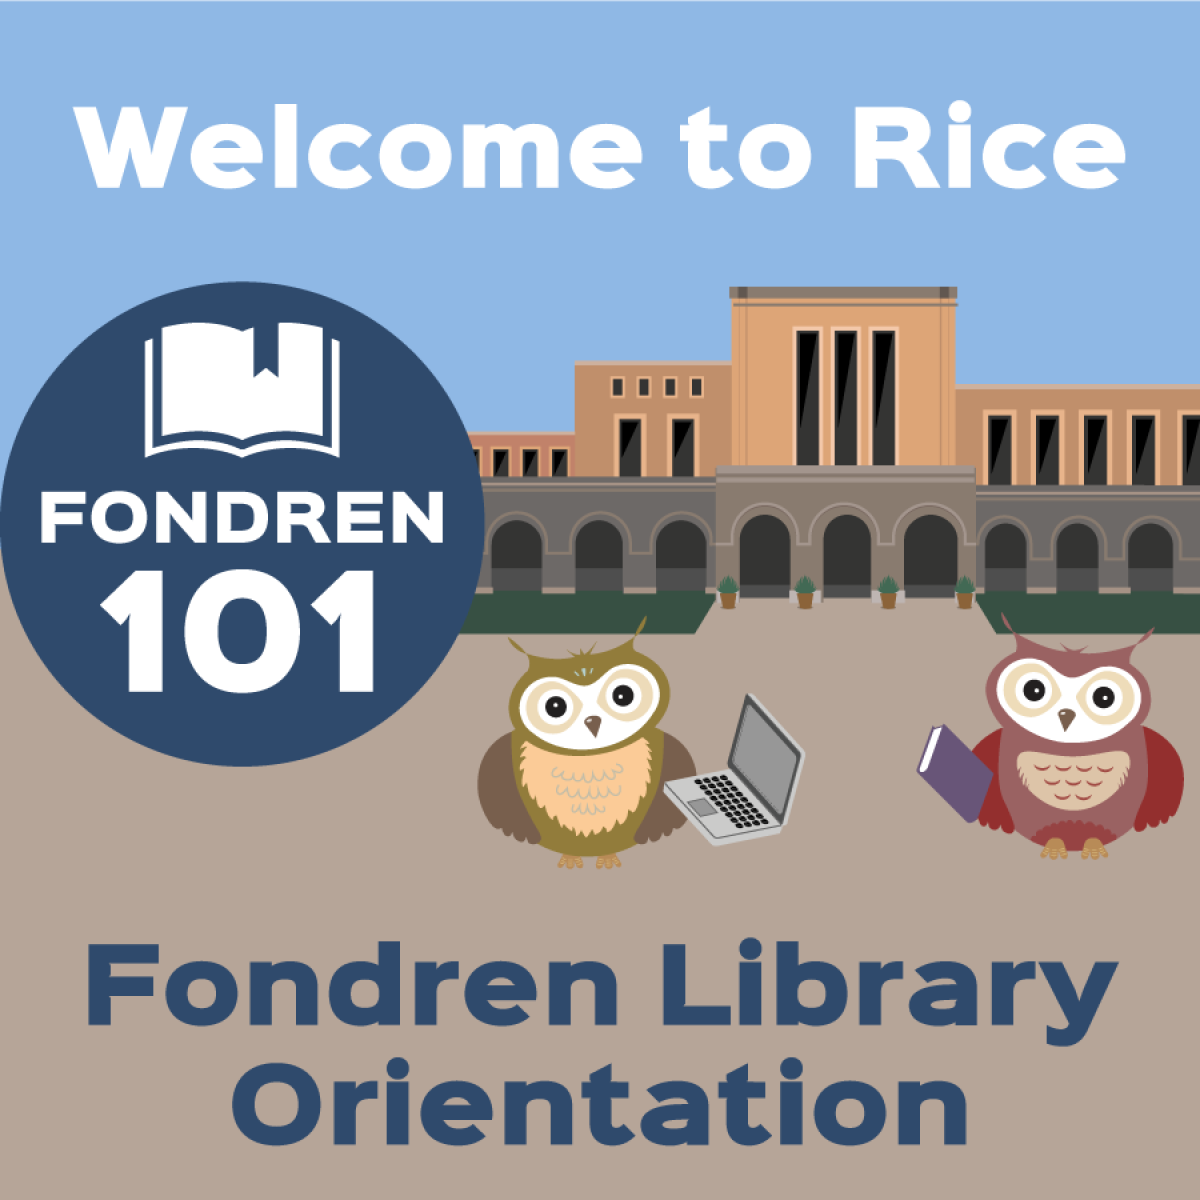 Welcome to Rice - Fondren 101 Library Orientation